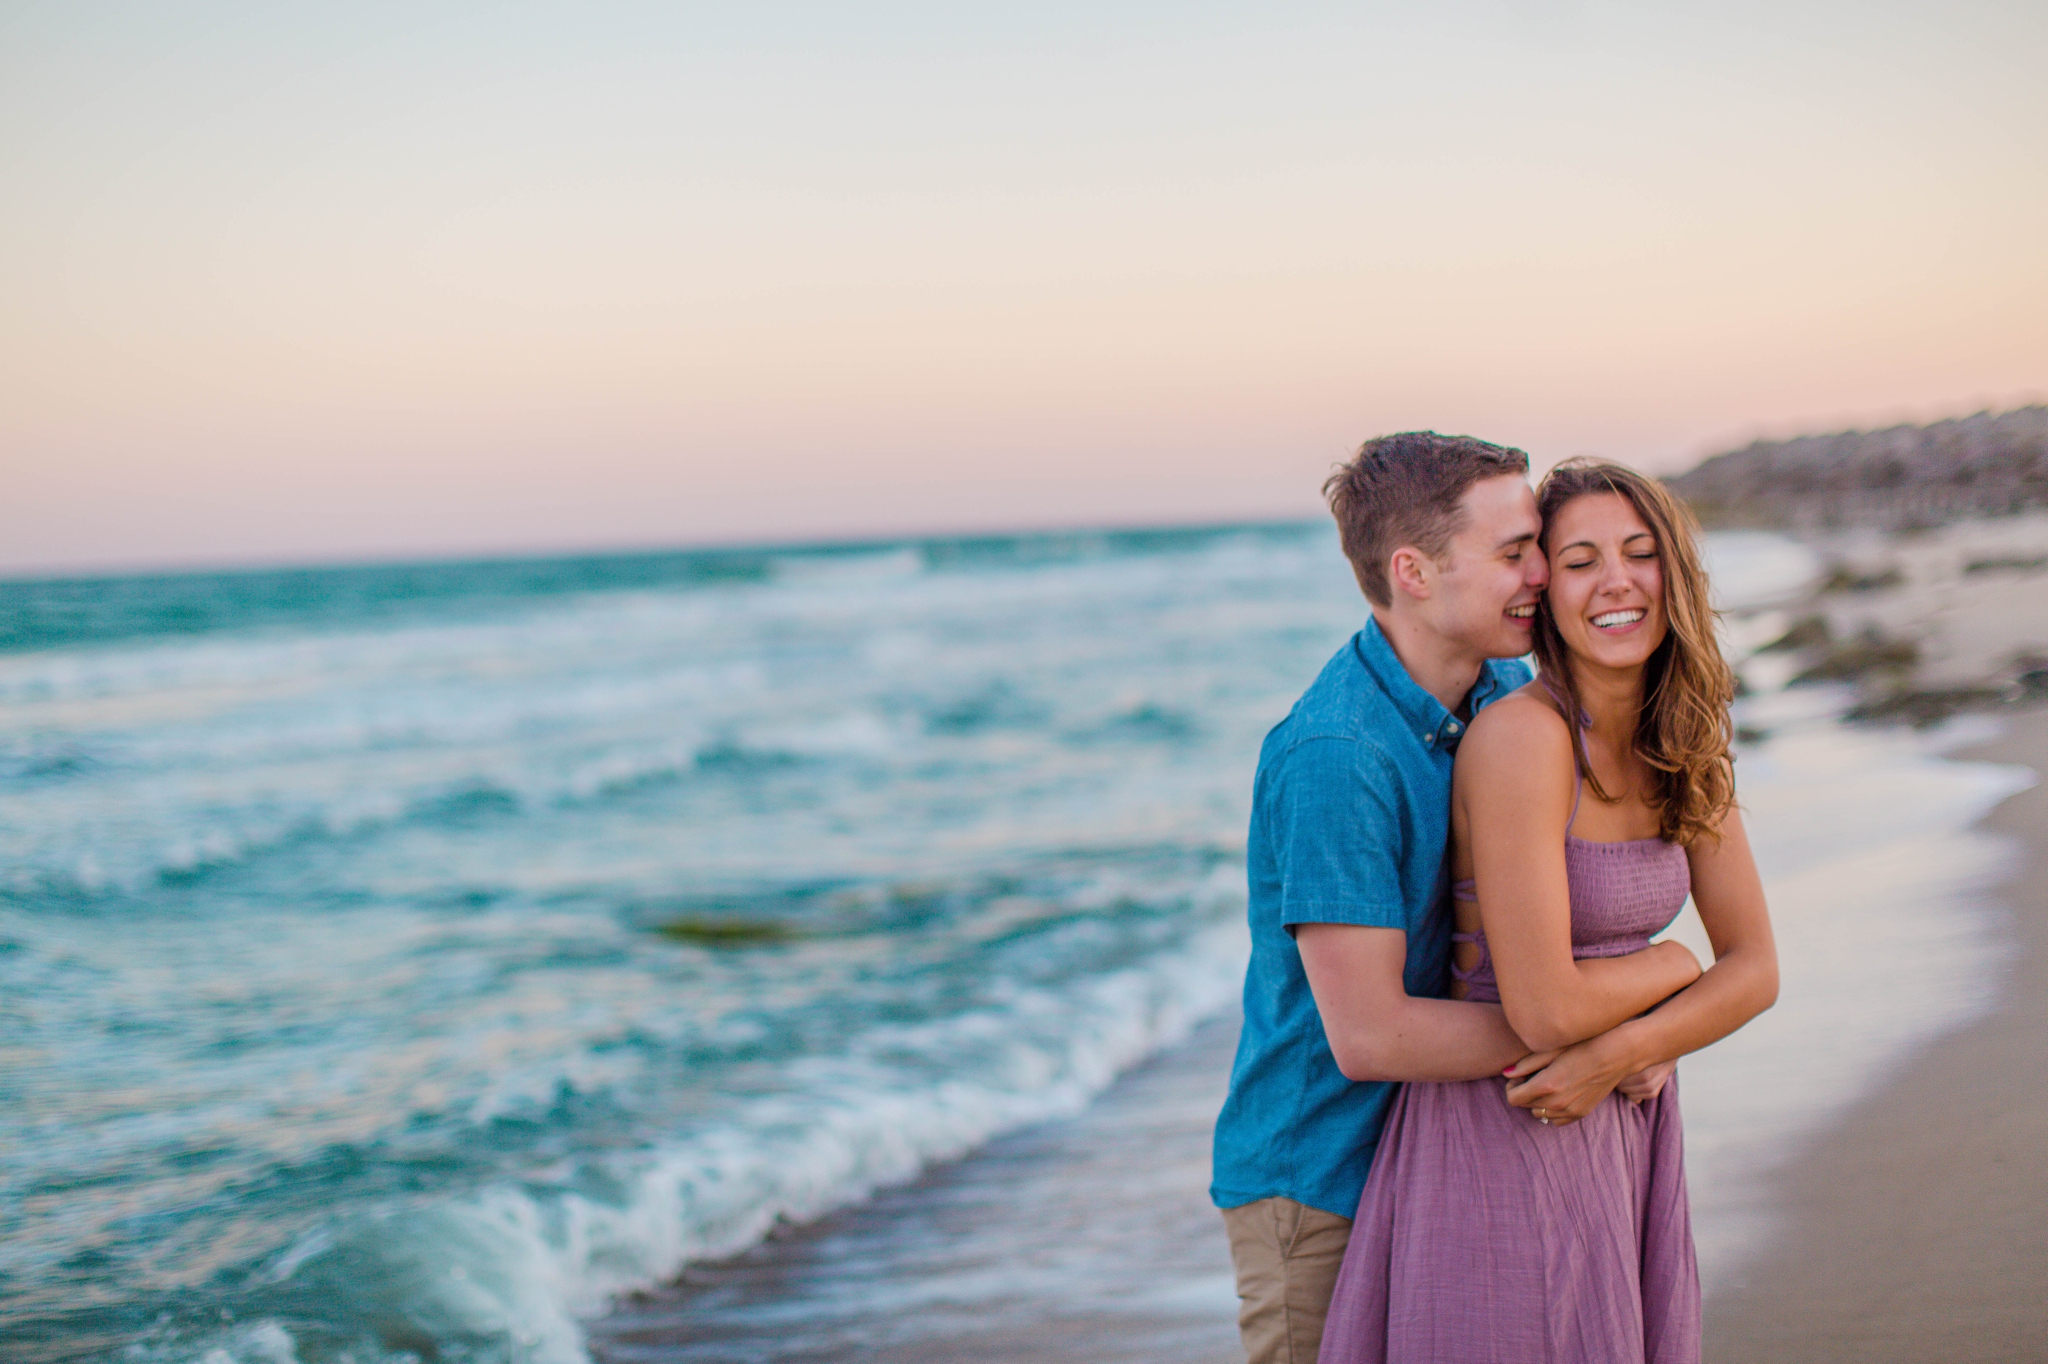  man whispering into his fiances ear - - Woman is in a flowy pastel maxi dress - candid and unposed golden light session - beach engagement photographer in honolulu, oahu, hawaii - johanna dye photography 